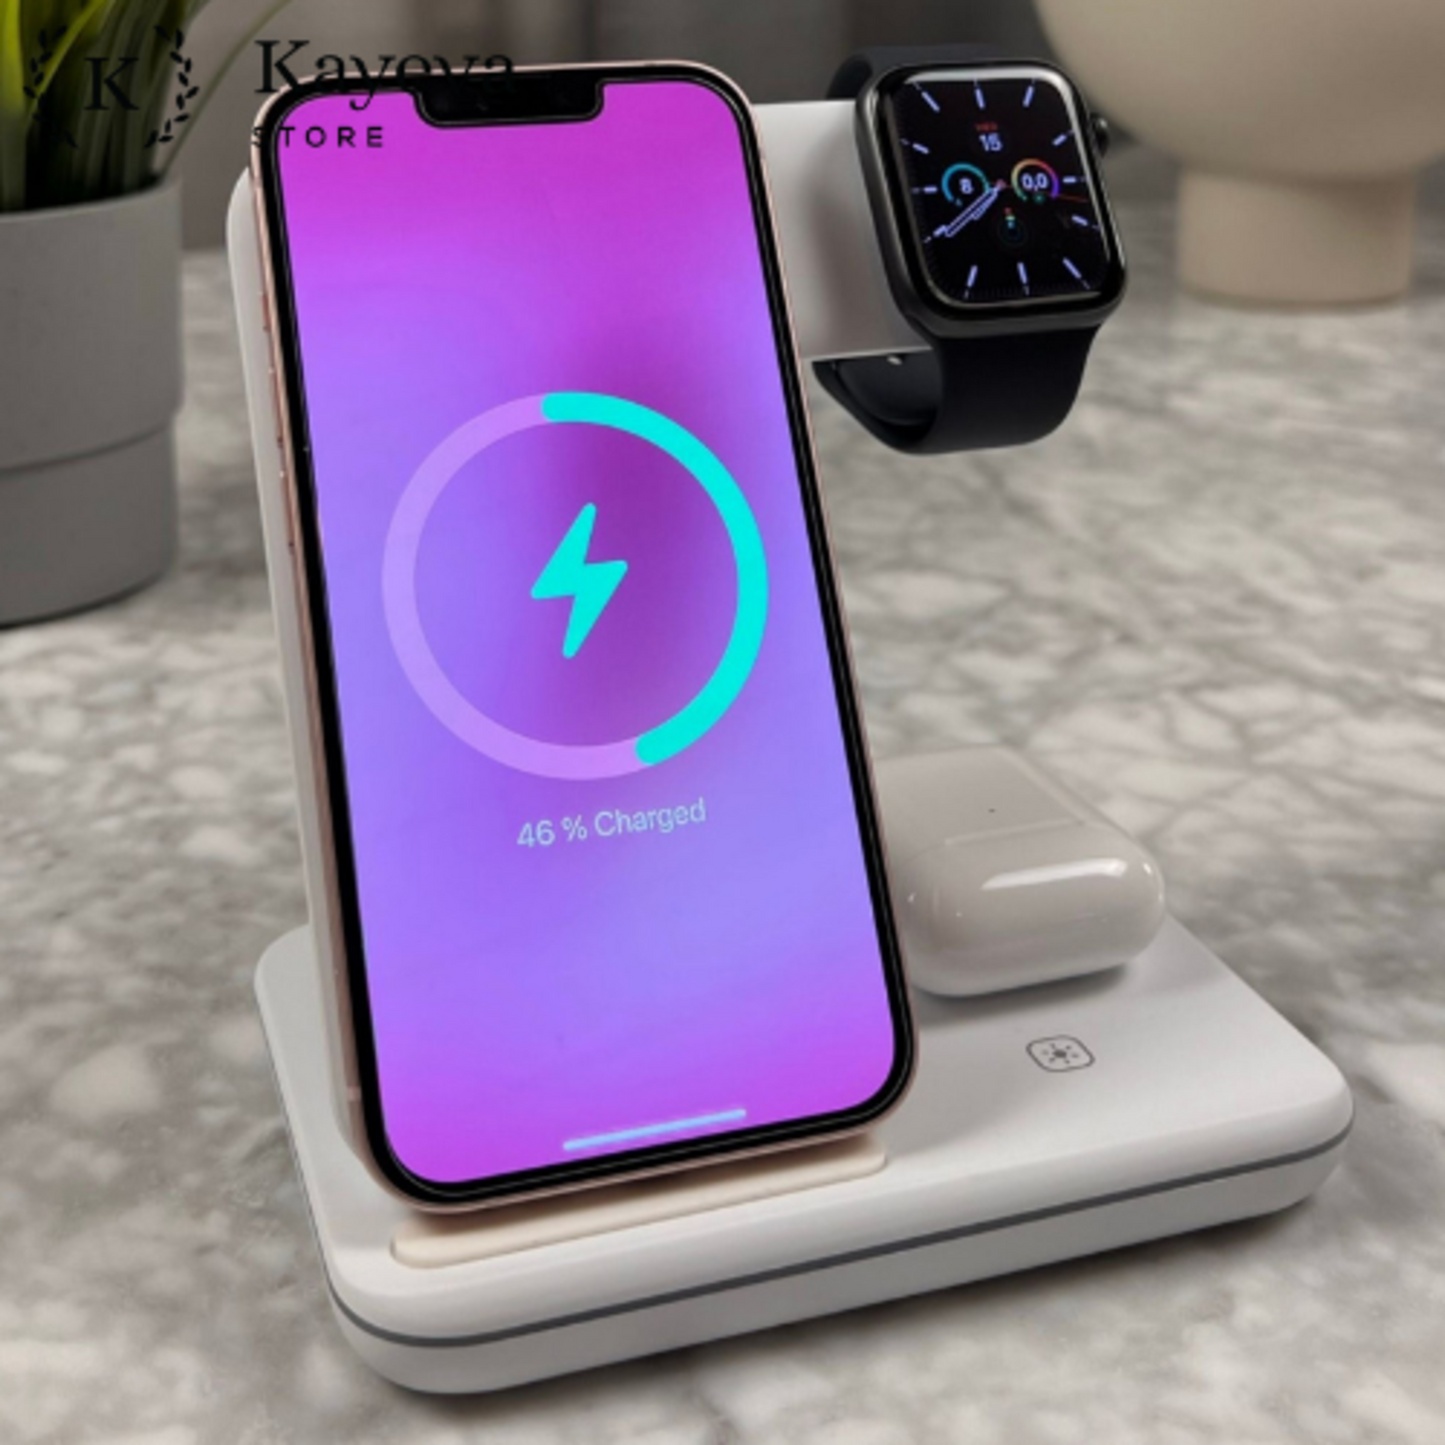 3 in 1 Apple Wireless Charger - Fast Wireless Charger